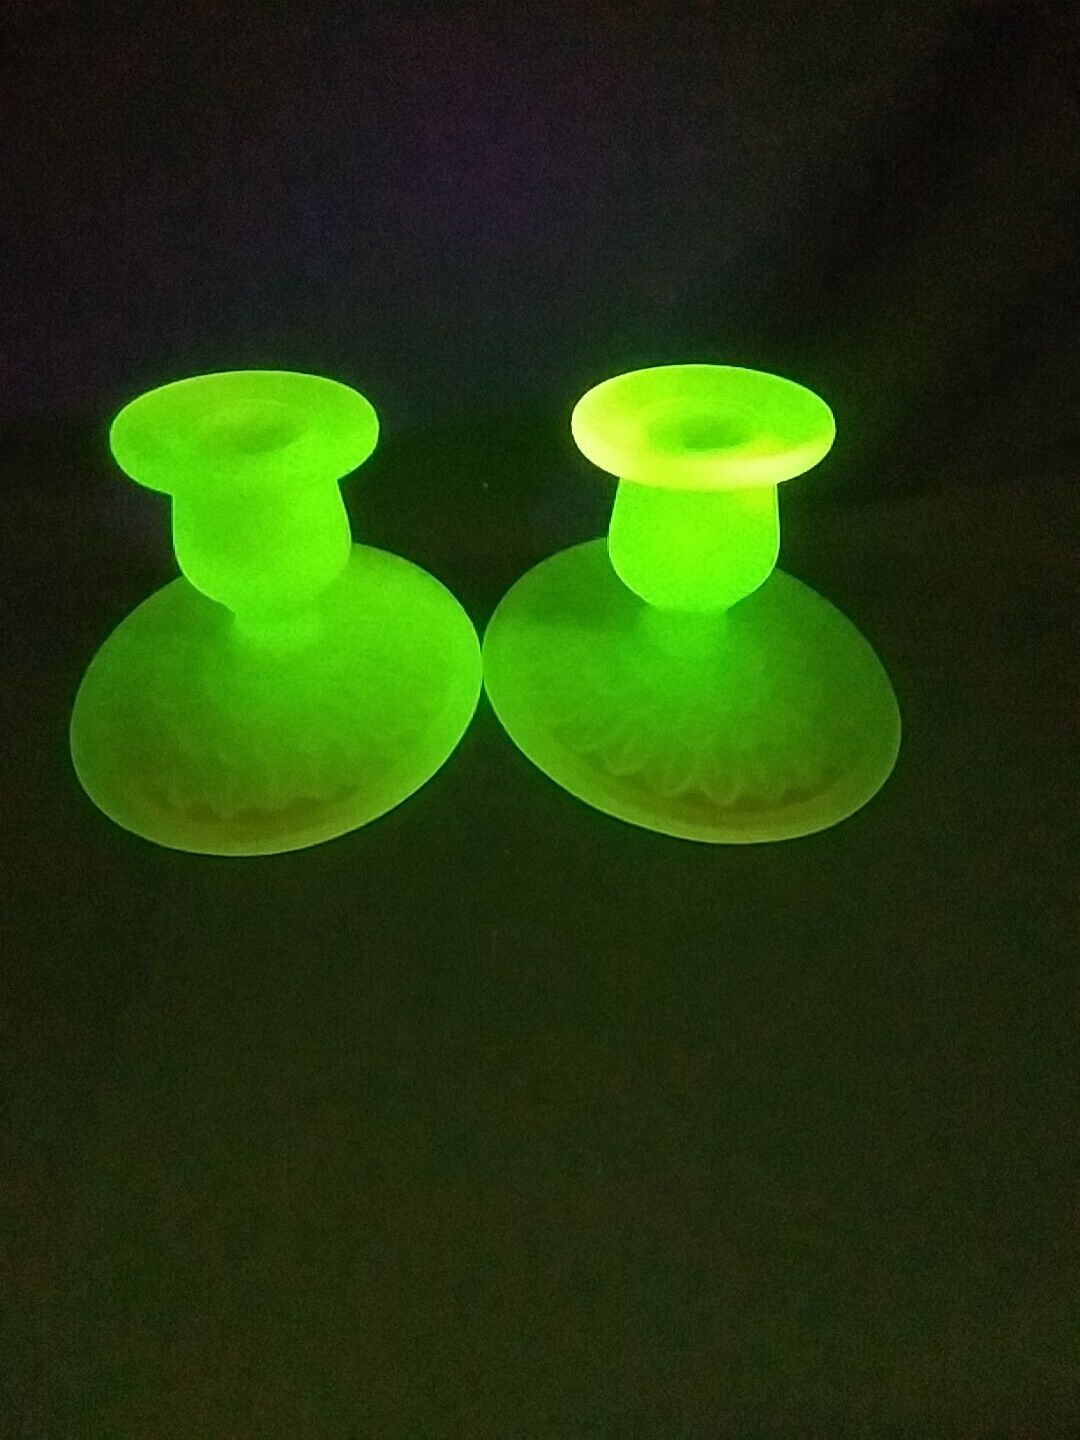 2 Vintage 1940s Green Uranium Glass Satin Frosted Art Deco Candle Holders GLOW